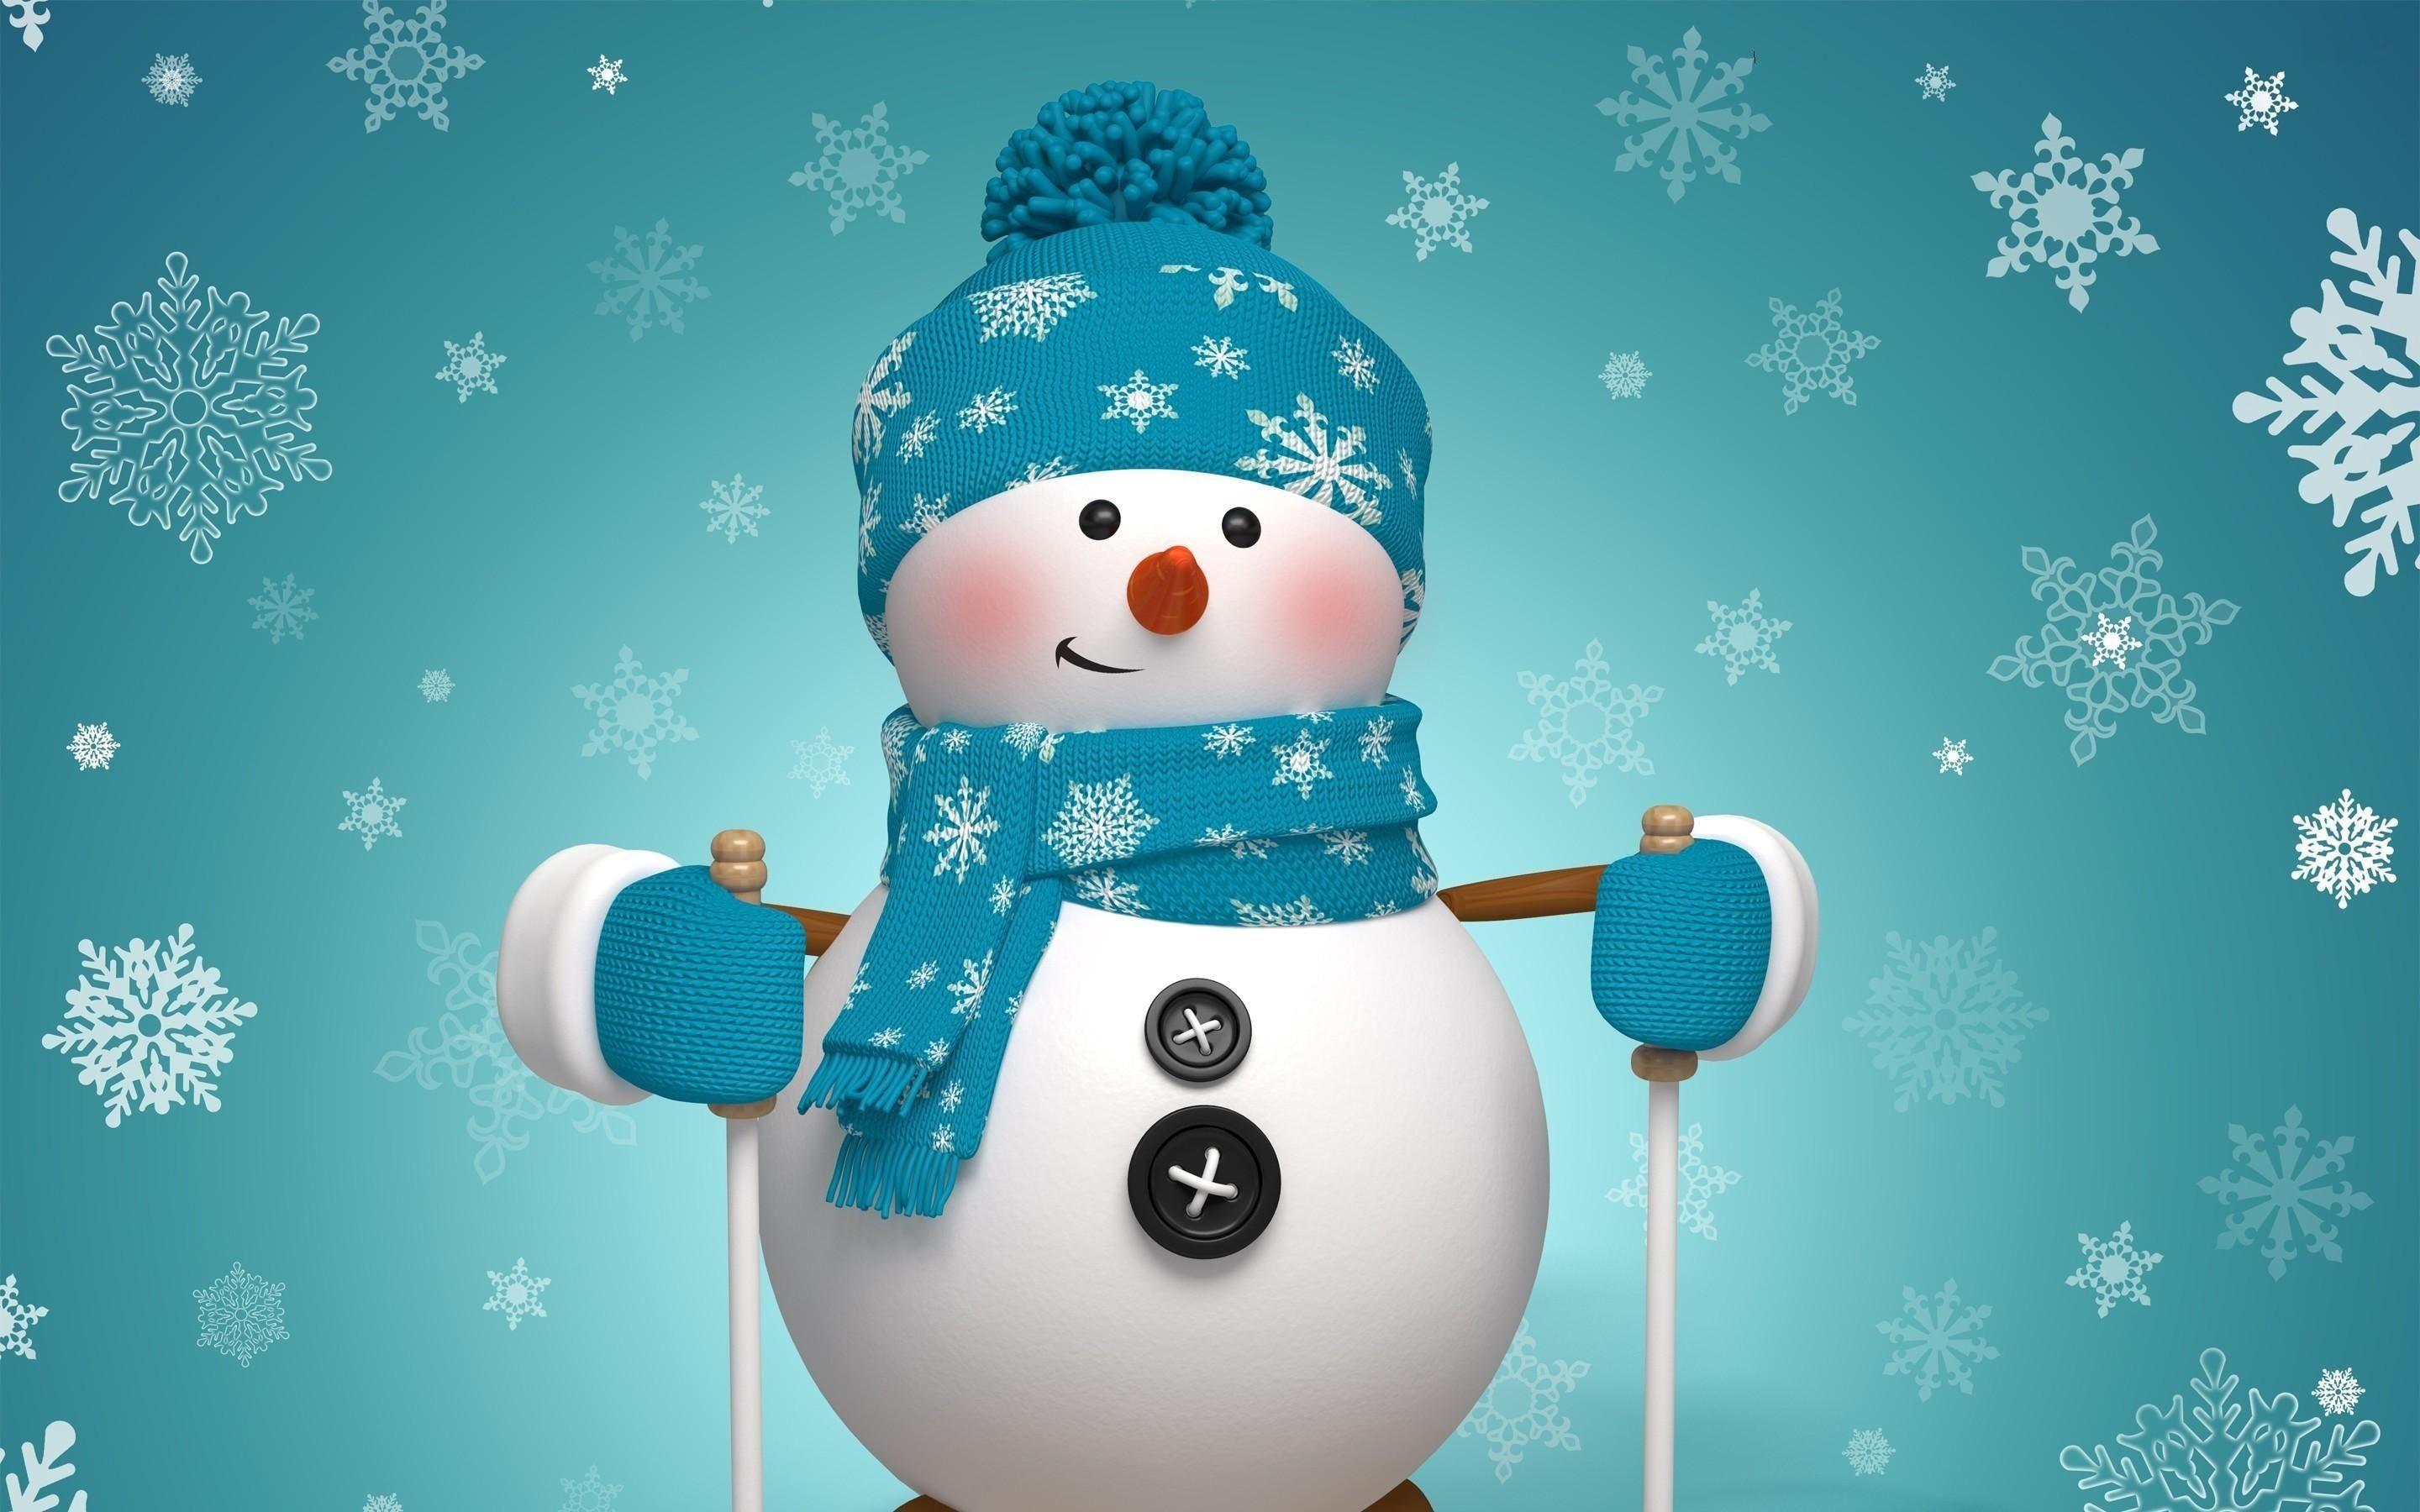 Share more than 56 snowman wallpaper for iphone super hot - in.cdgdbentre